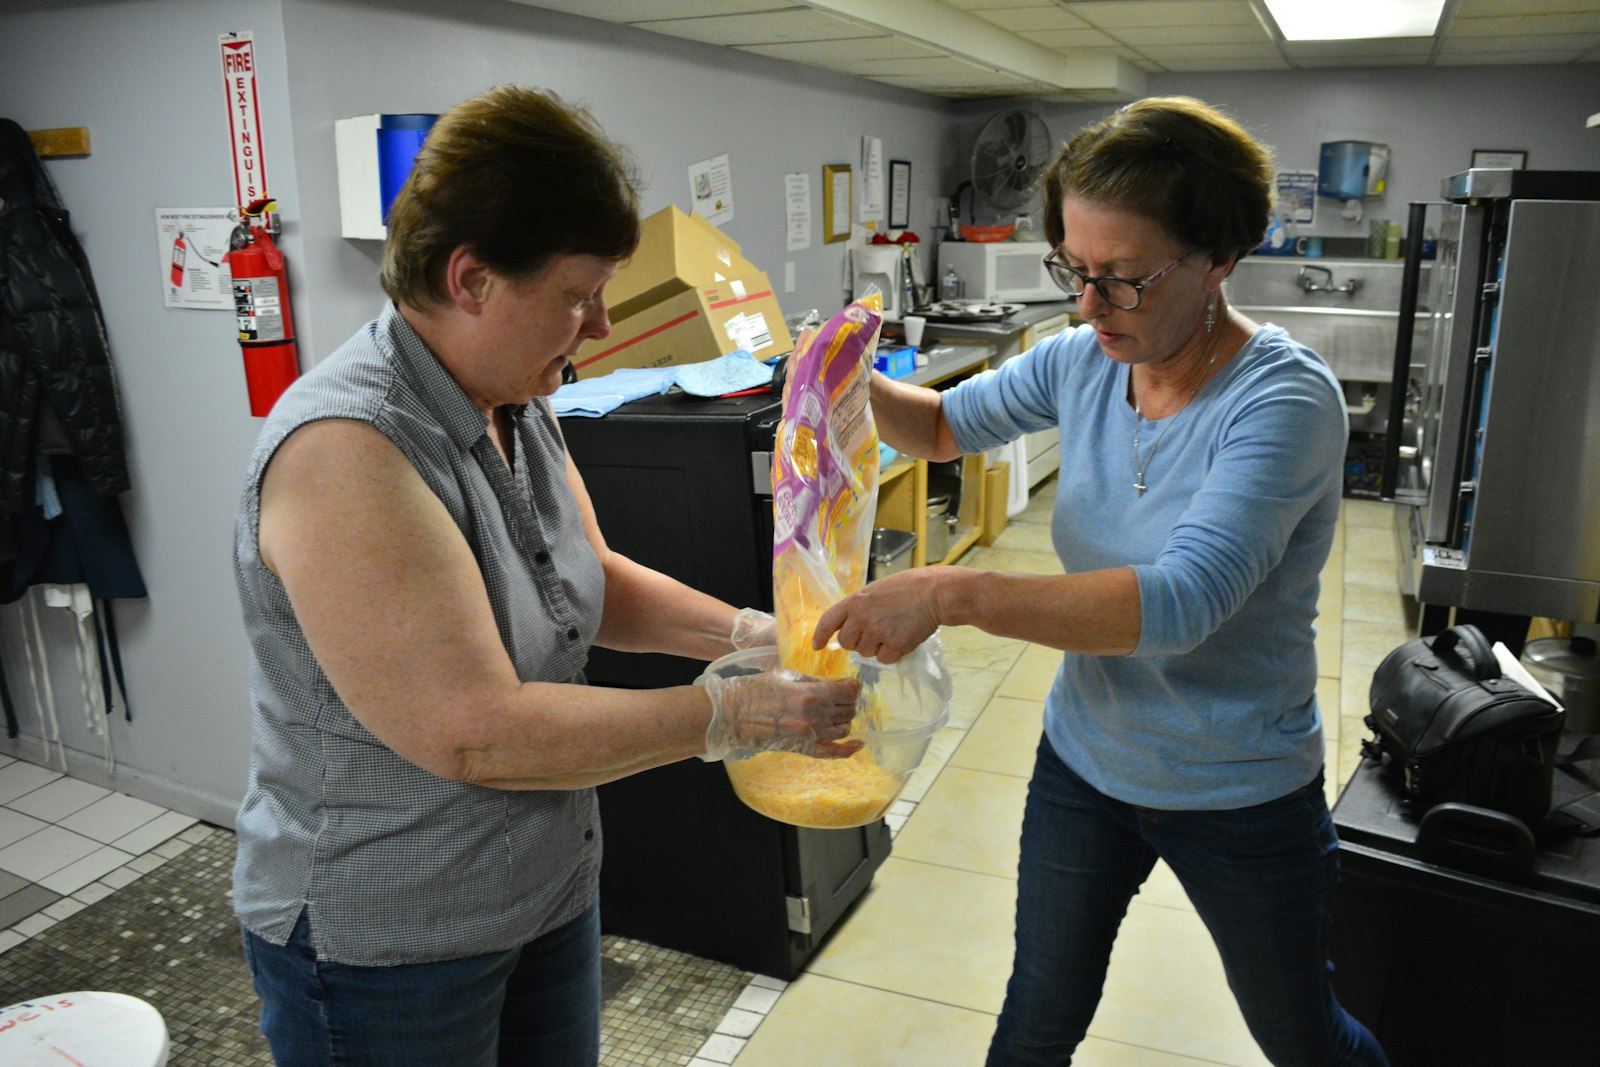 Val Thompson, Christian service coordinator for St. Mary Parish in Milford, right, helps Peggy Cottington, a volunteer from the parish, refill the cheese bowl during a Mexican-themed dinner at Hope Warming Center in Pontiac on Dec. 4, 2017. (Michael Stechschulte | Detroit Catholic file photo)